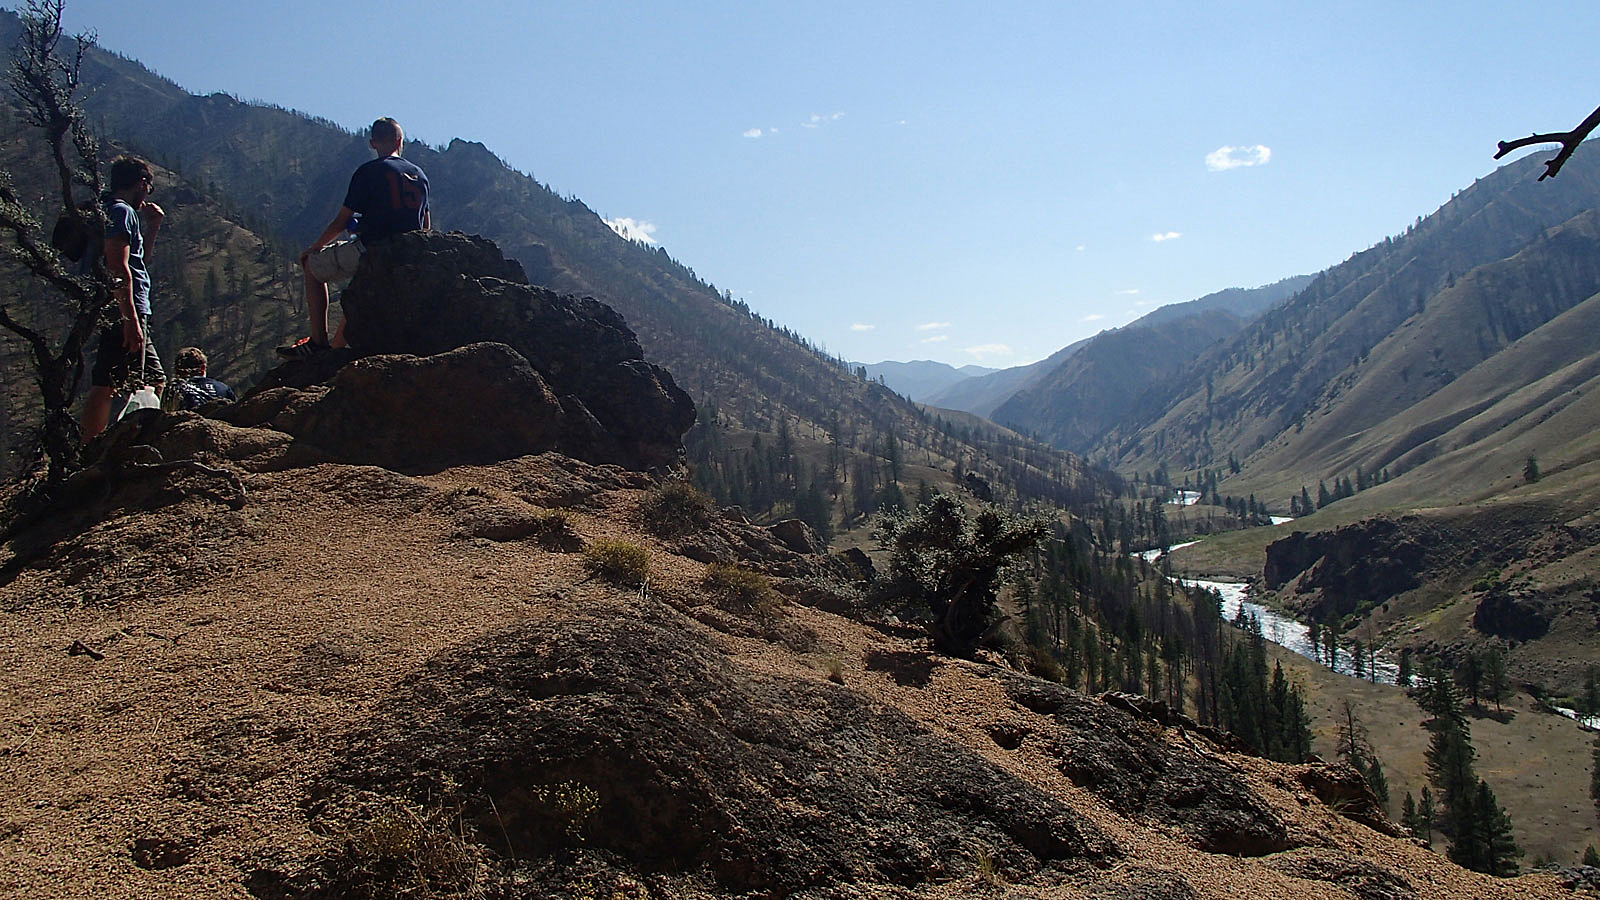 Overlooking the Middle Fork of the Salmon River in Idaho